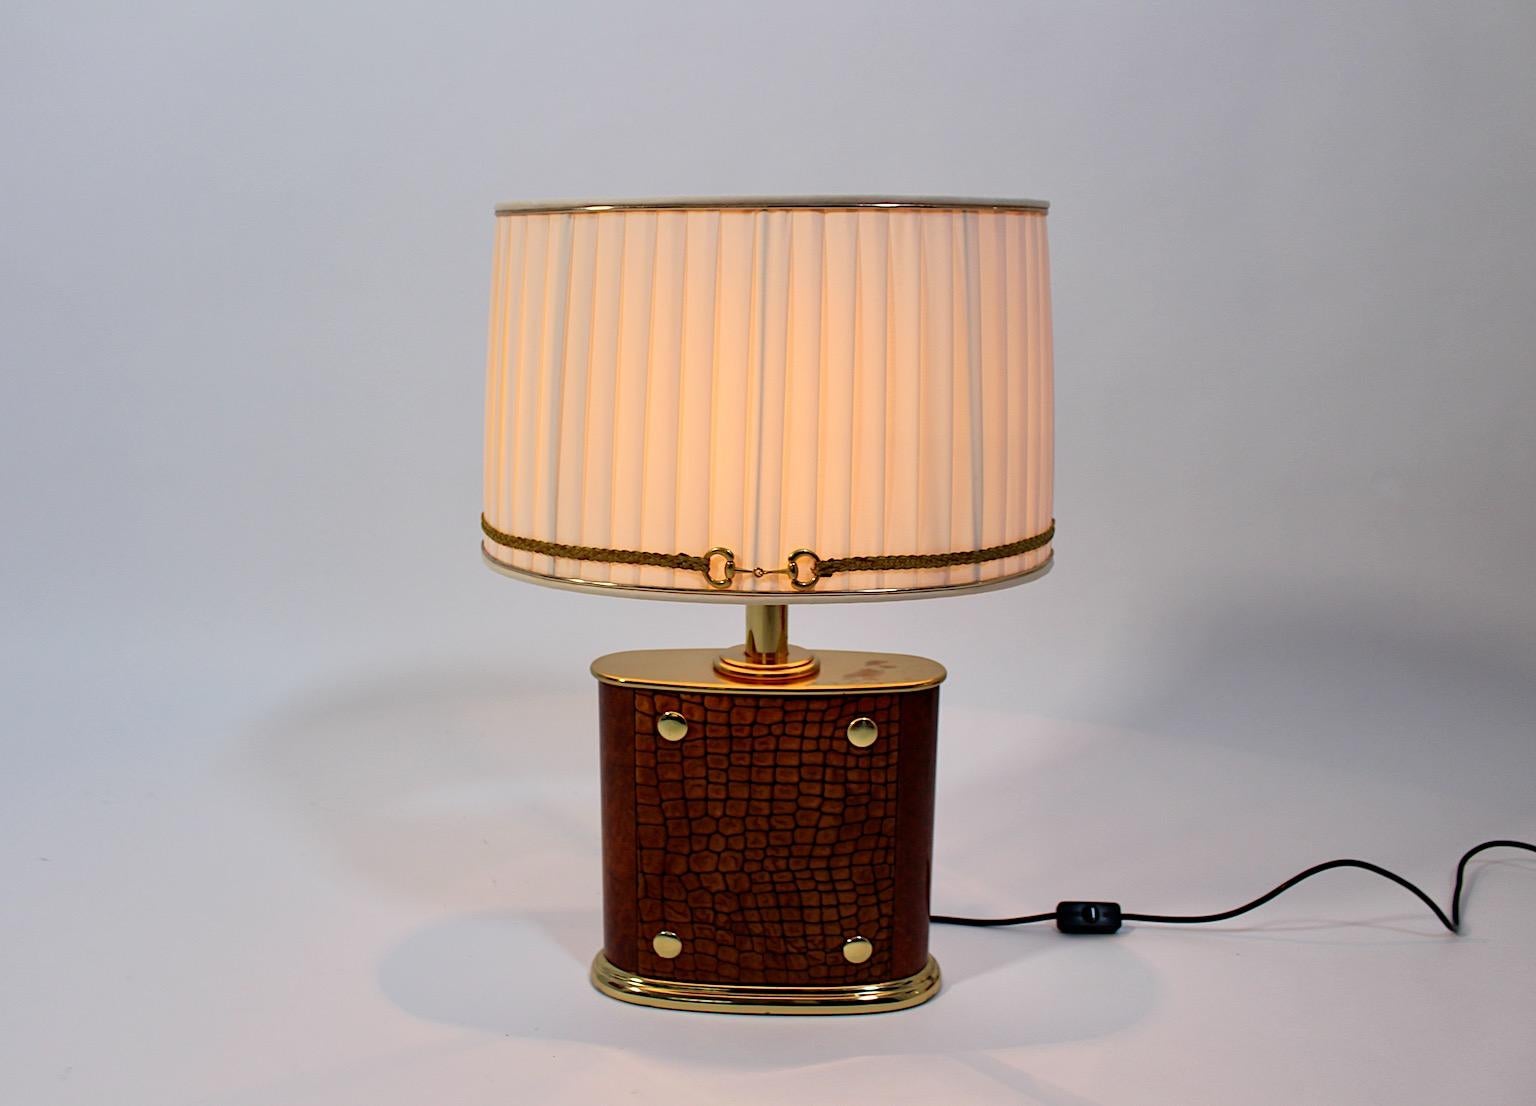 Italian Mid Century Modern Vintage Table Lamp Brass Brown Suede Paolo Gucci 1960s Italy For Sale